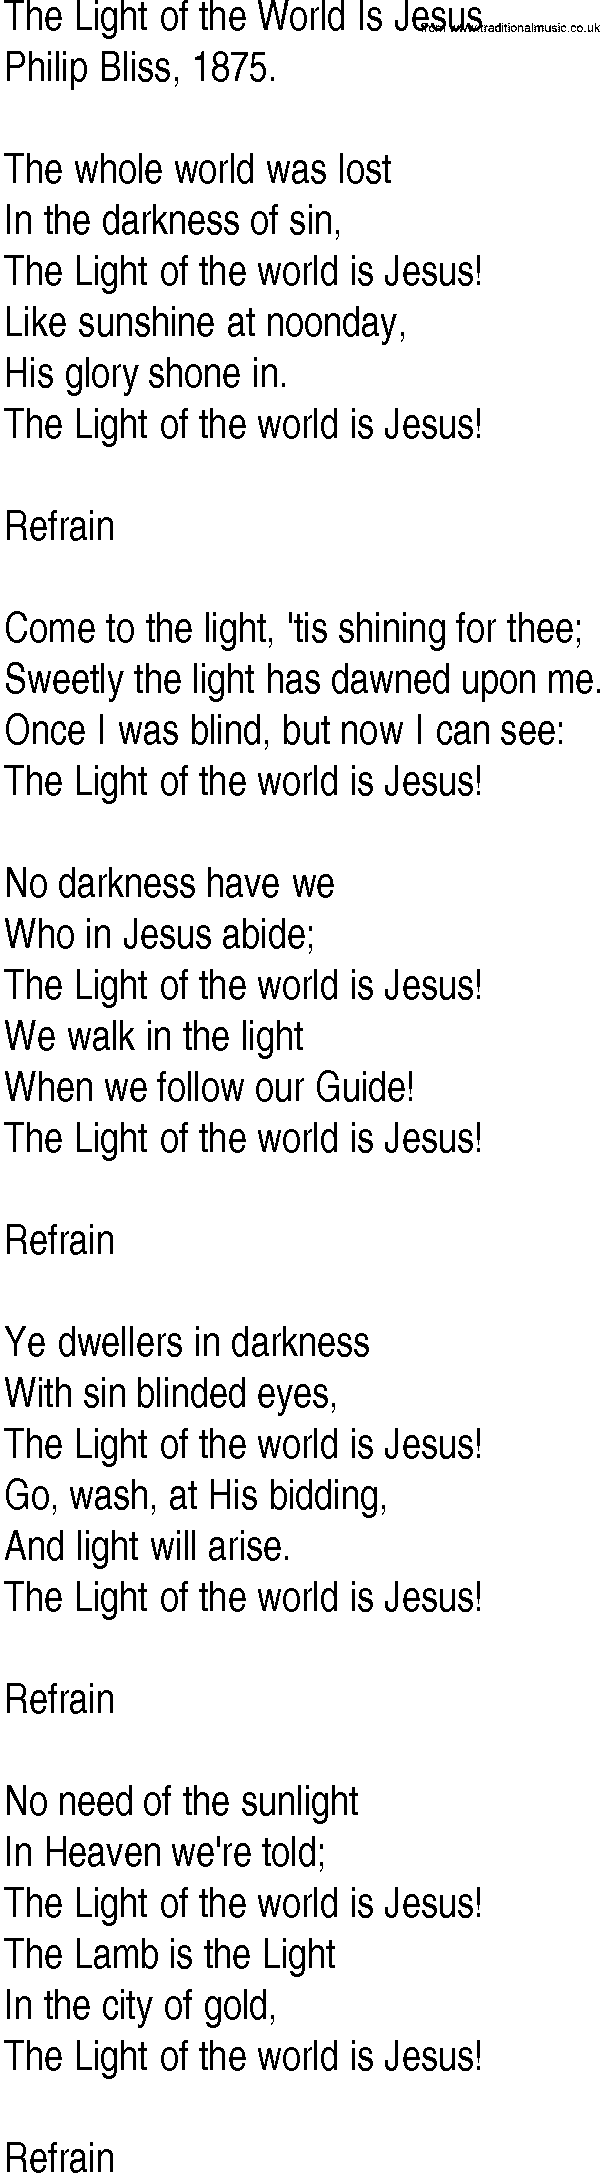 Hymn and Gospel Song: The Light of the World Is Jesus by Philip Bliss lyrics